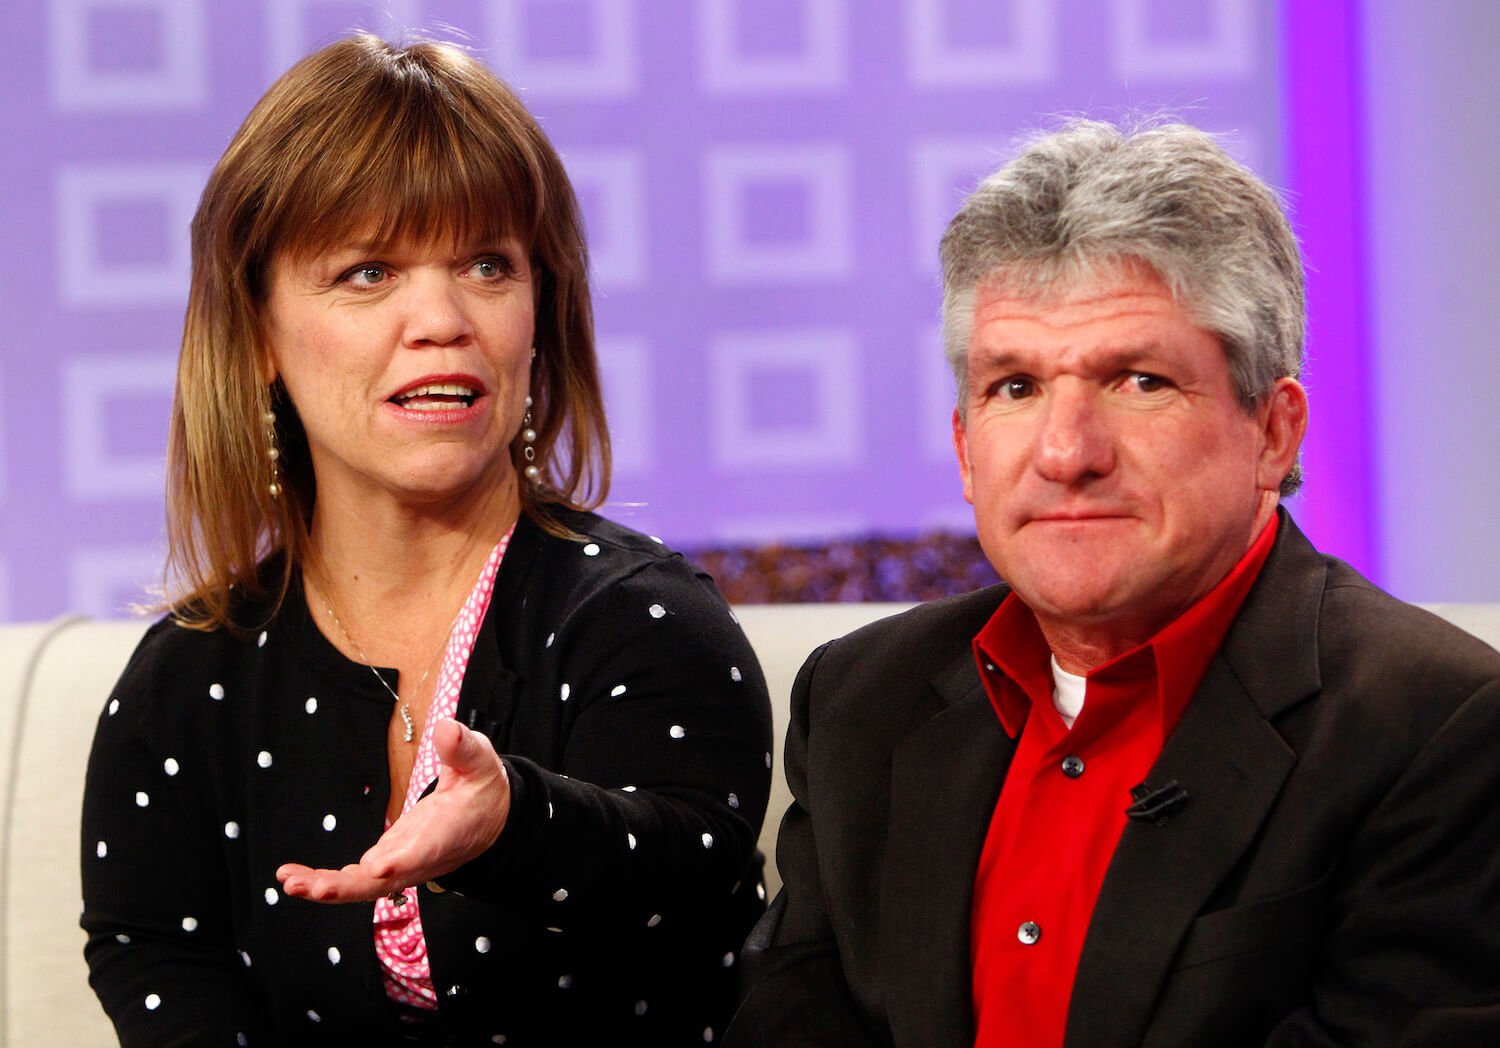 Amy and Matt Roloff from 'Little People Big World' speaking while sitting on a couch against a purple background